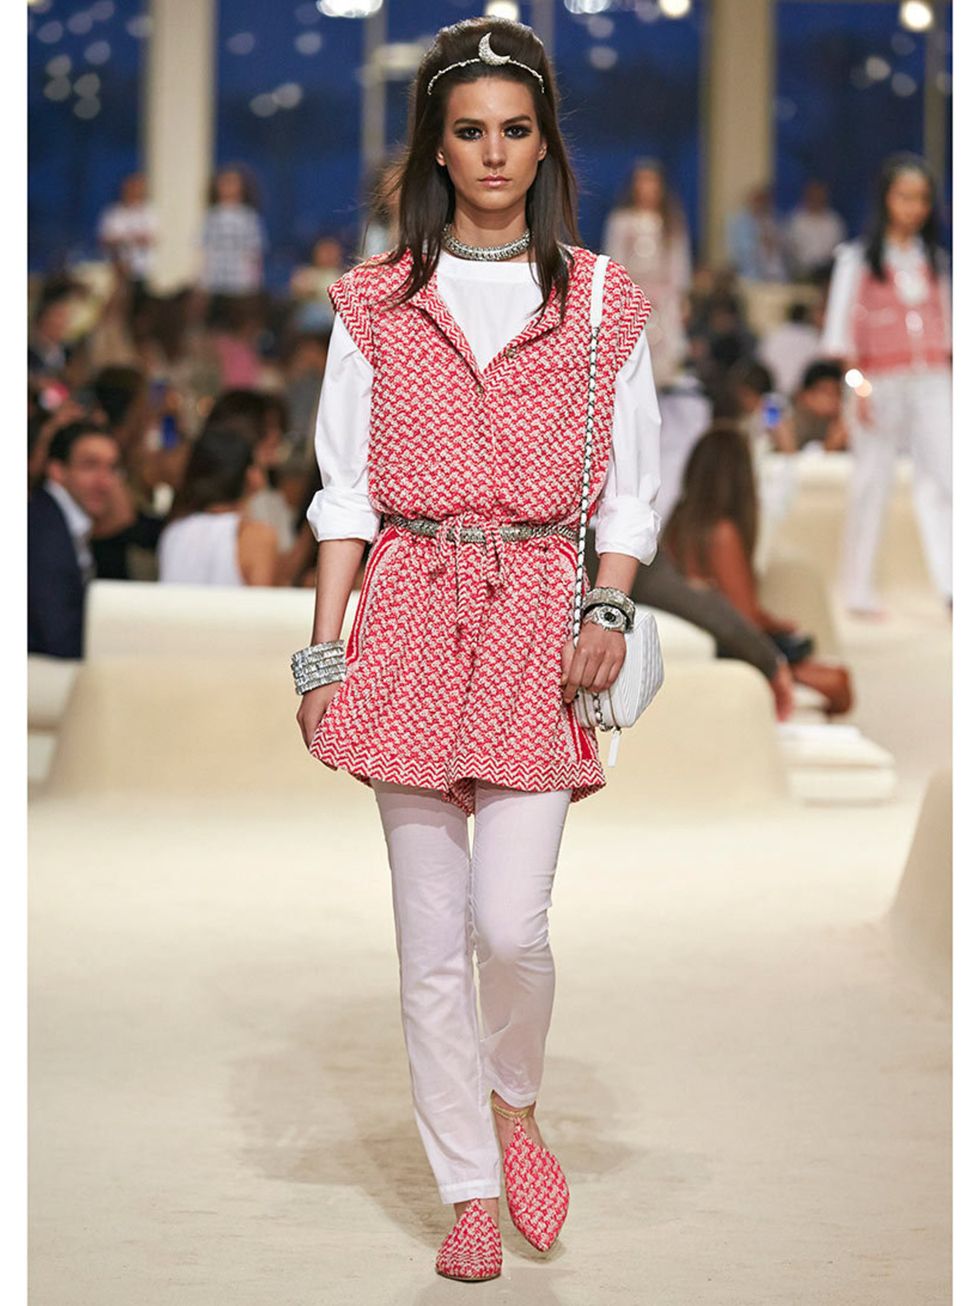 Chanel Cruise 2015 Catwalk Collection: See all the pictures from Dubai